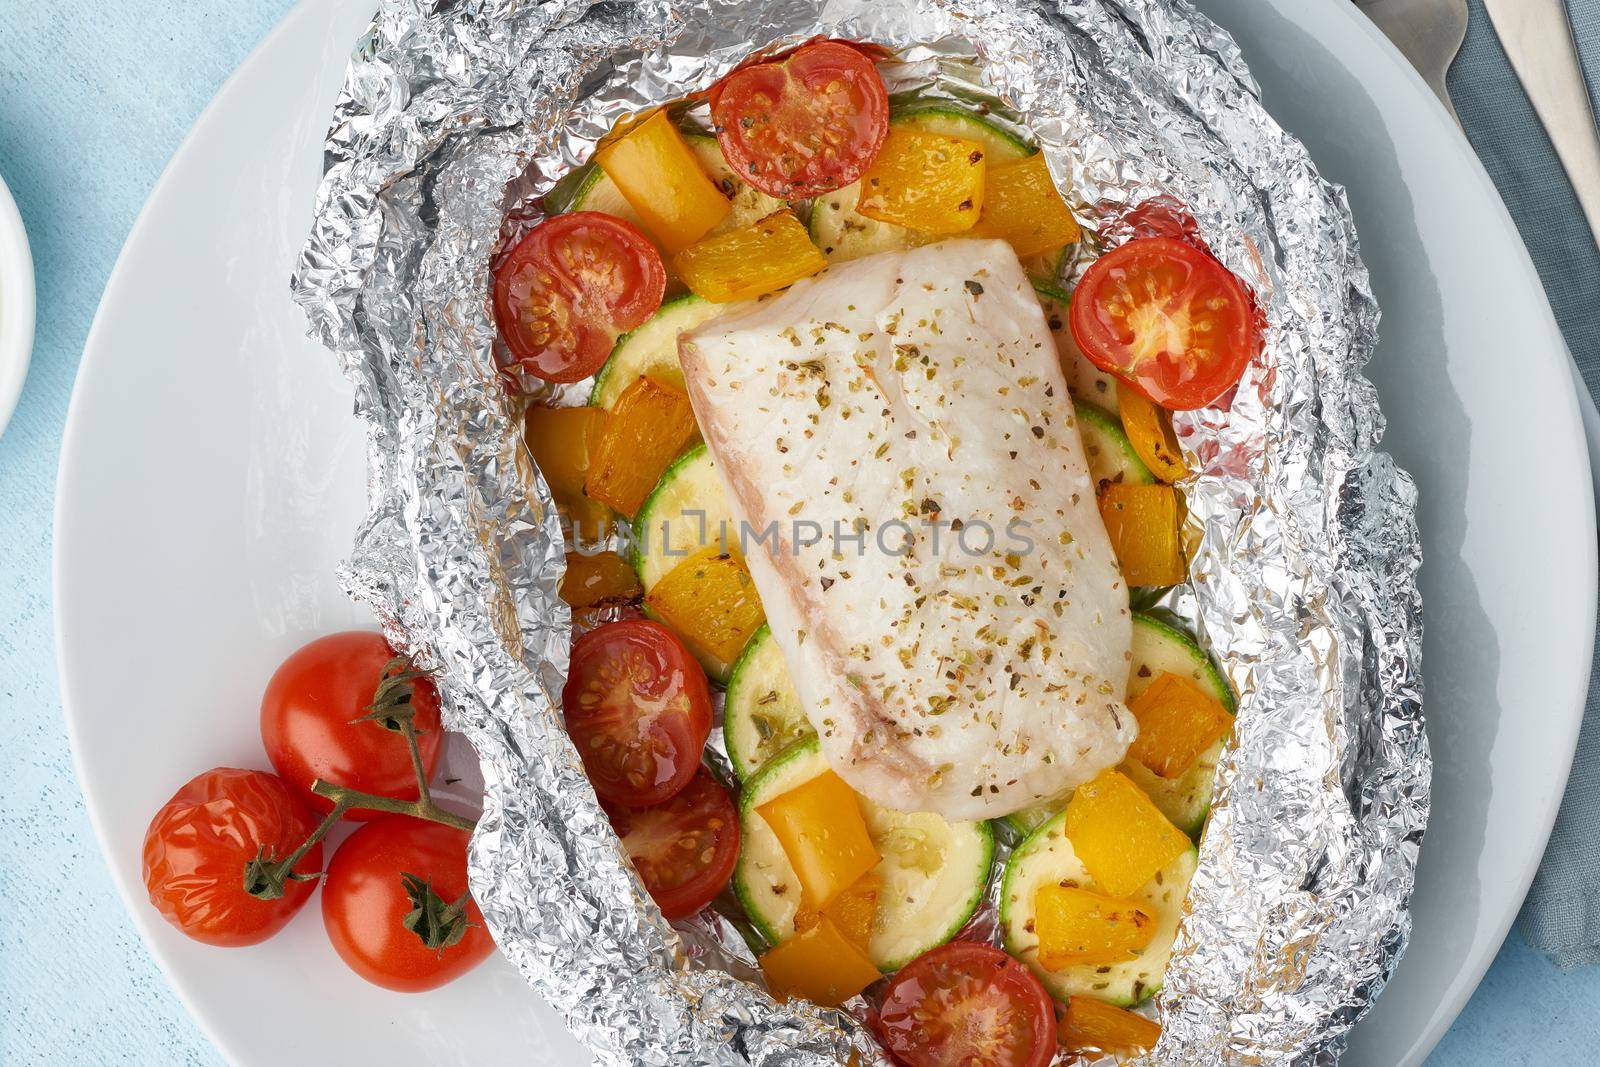 Foil pack dinner with white fish. Oven baked fillet of cod, pike perch with vegetables and pesto sauce. Healthy diet food, keto diet, Mediterranean cuisine. Blue background. Top view, close up